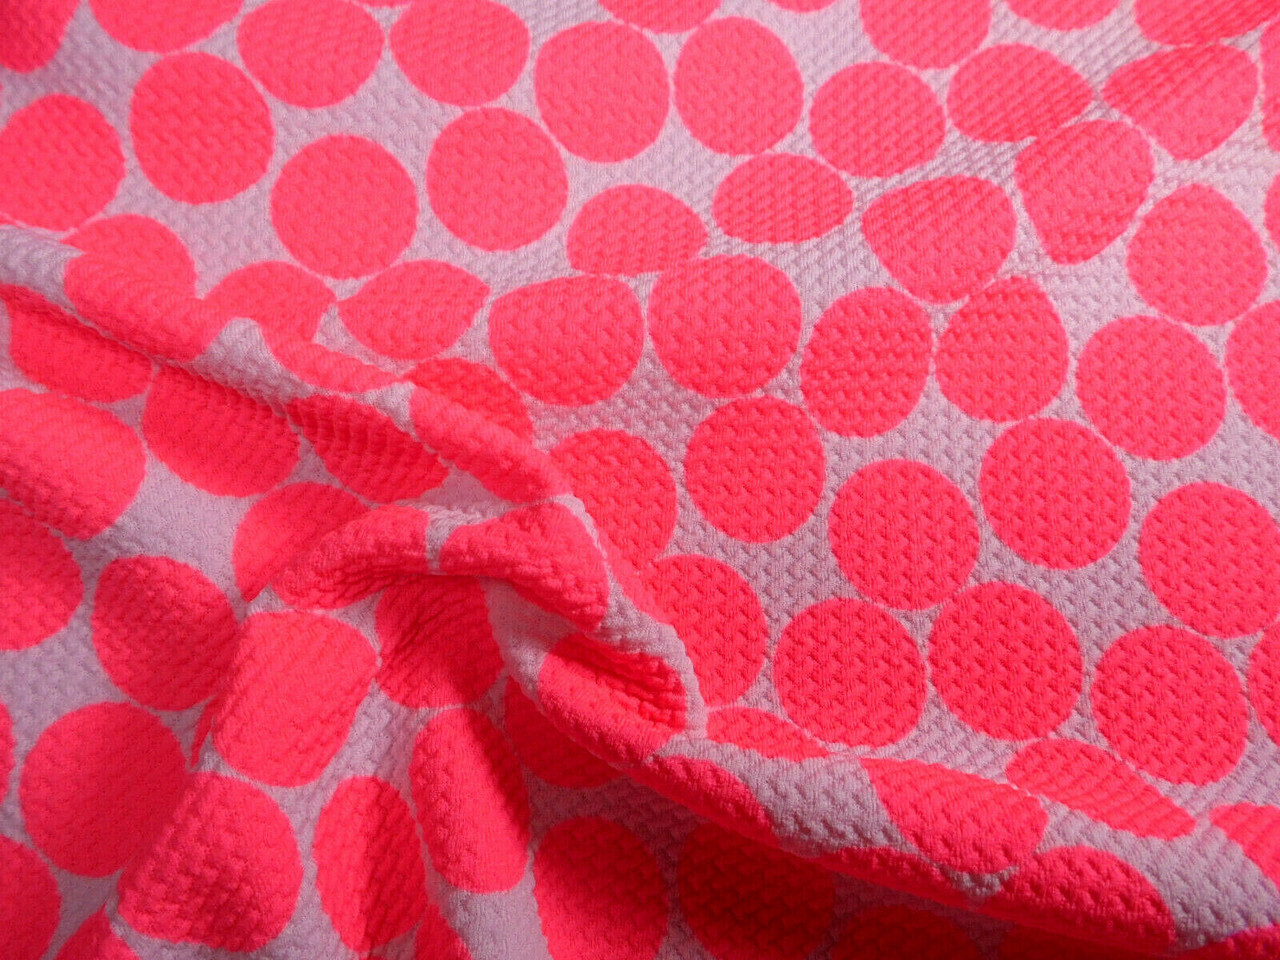 Bullet Printed Liverpool Textured Fabric Stretch White Big Neon Pink Polka Dot N31